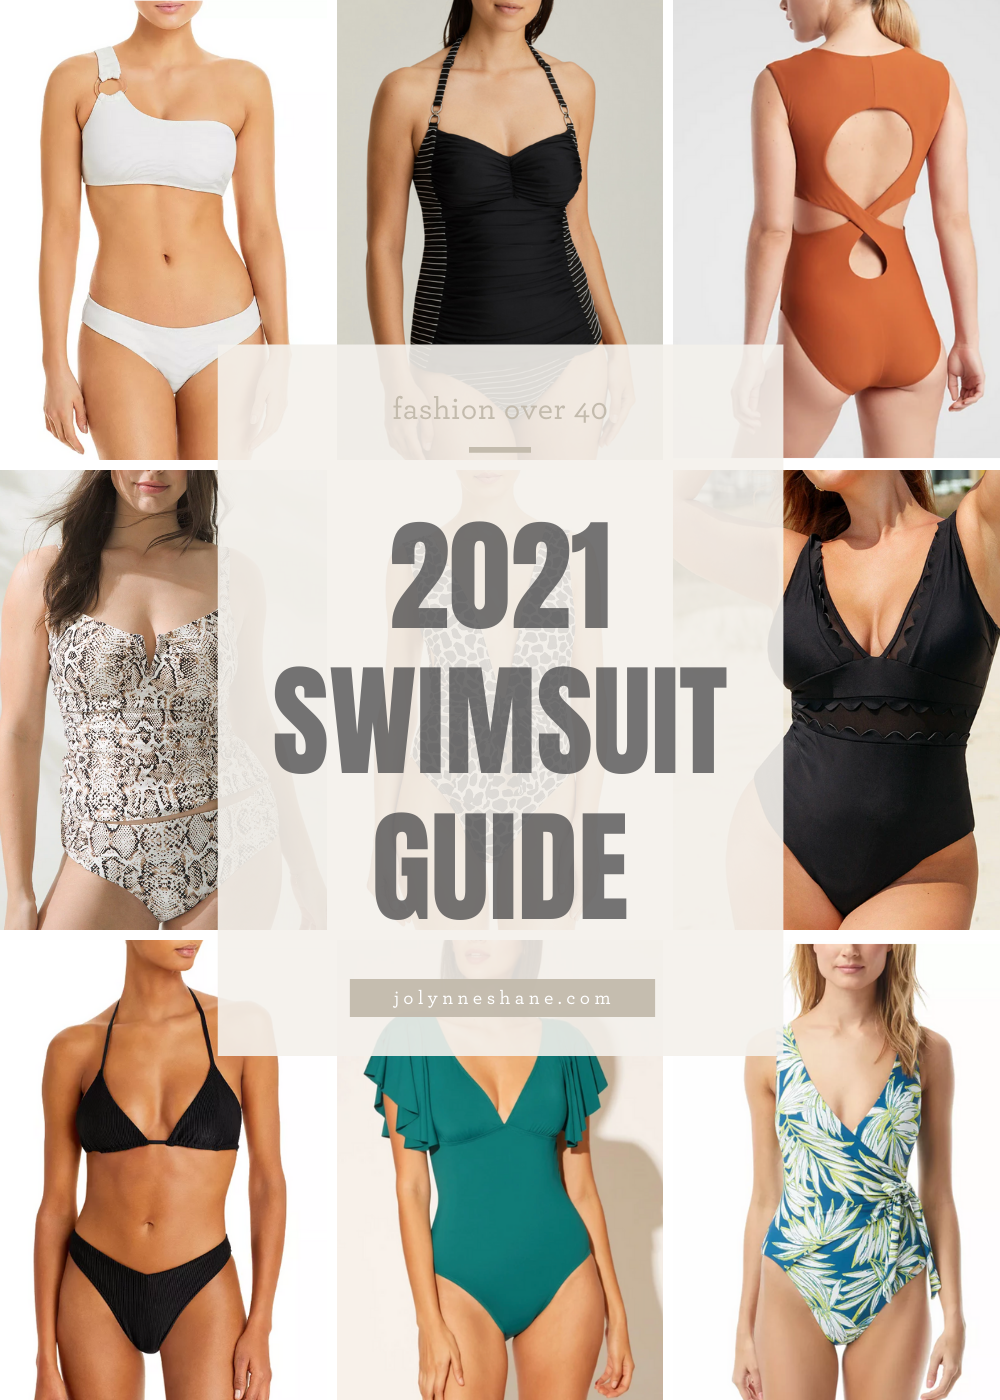 2021 Swimsuit Guide: Swimsuits for Women Over 40